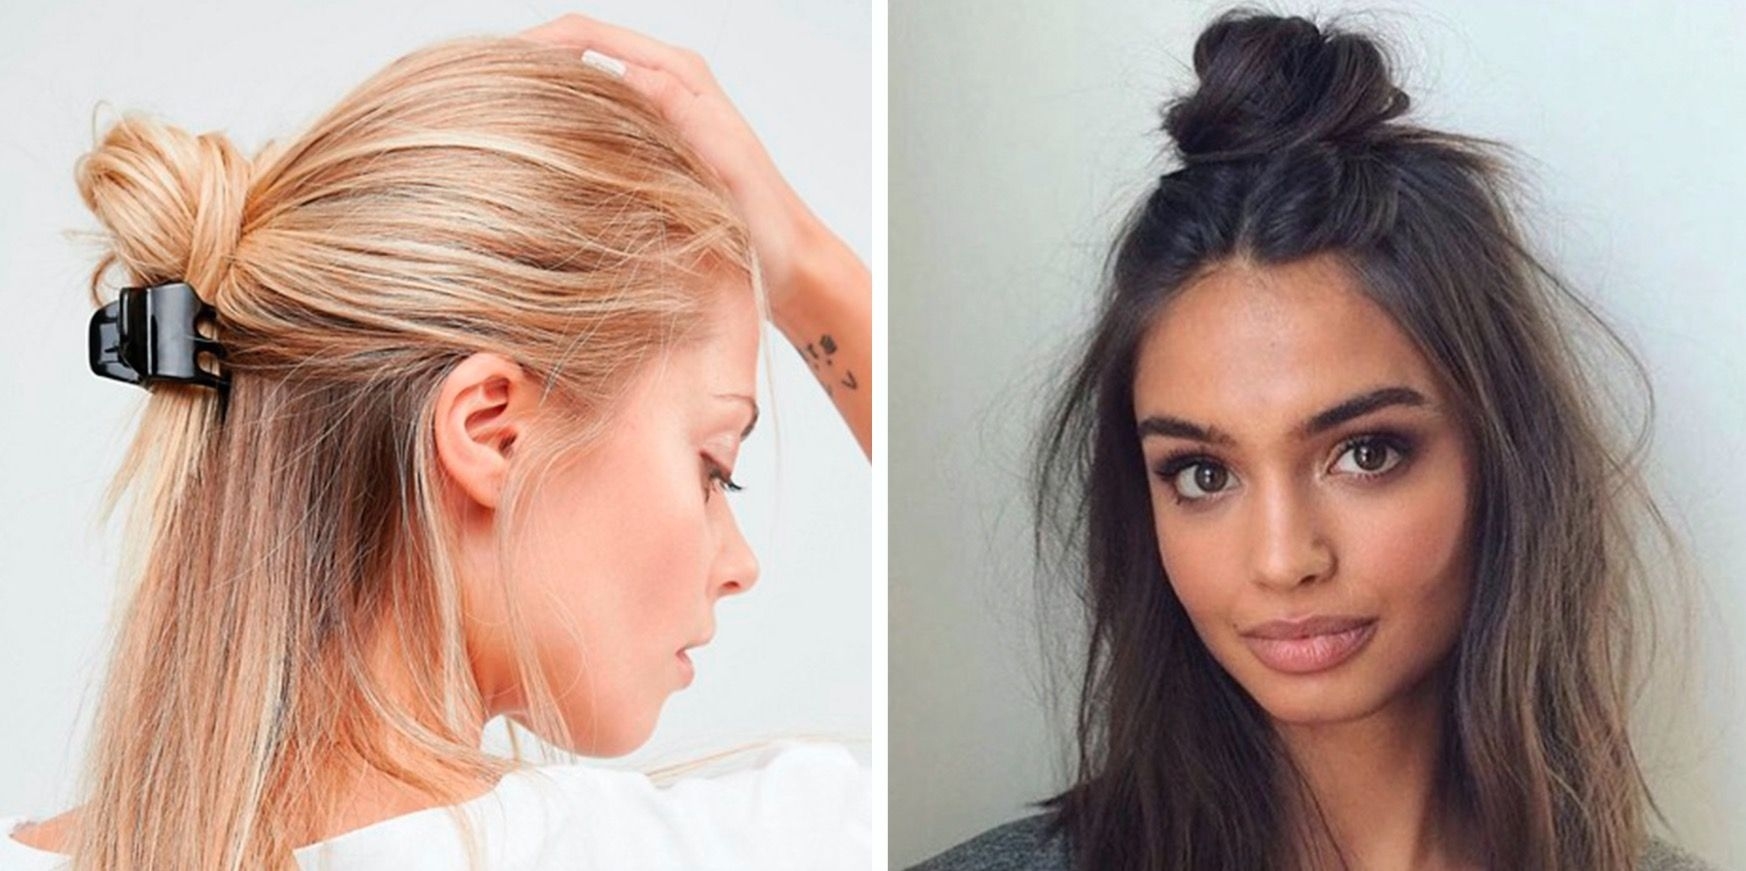 Hairstyles For Greasy Hair: 12 Ways To Disguise Oily Roots pertaining to Hairstyles For Unwashed Hair